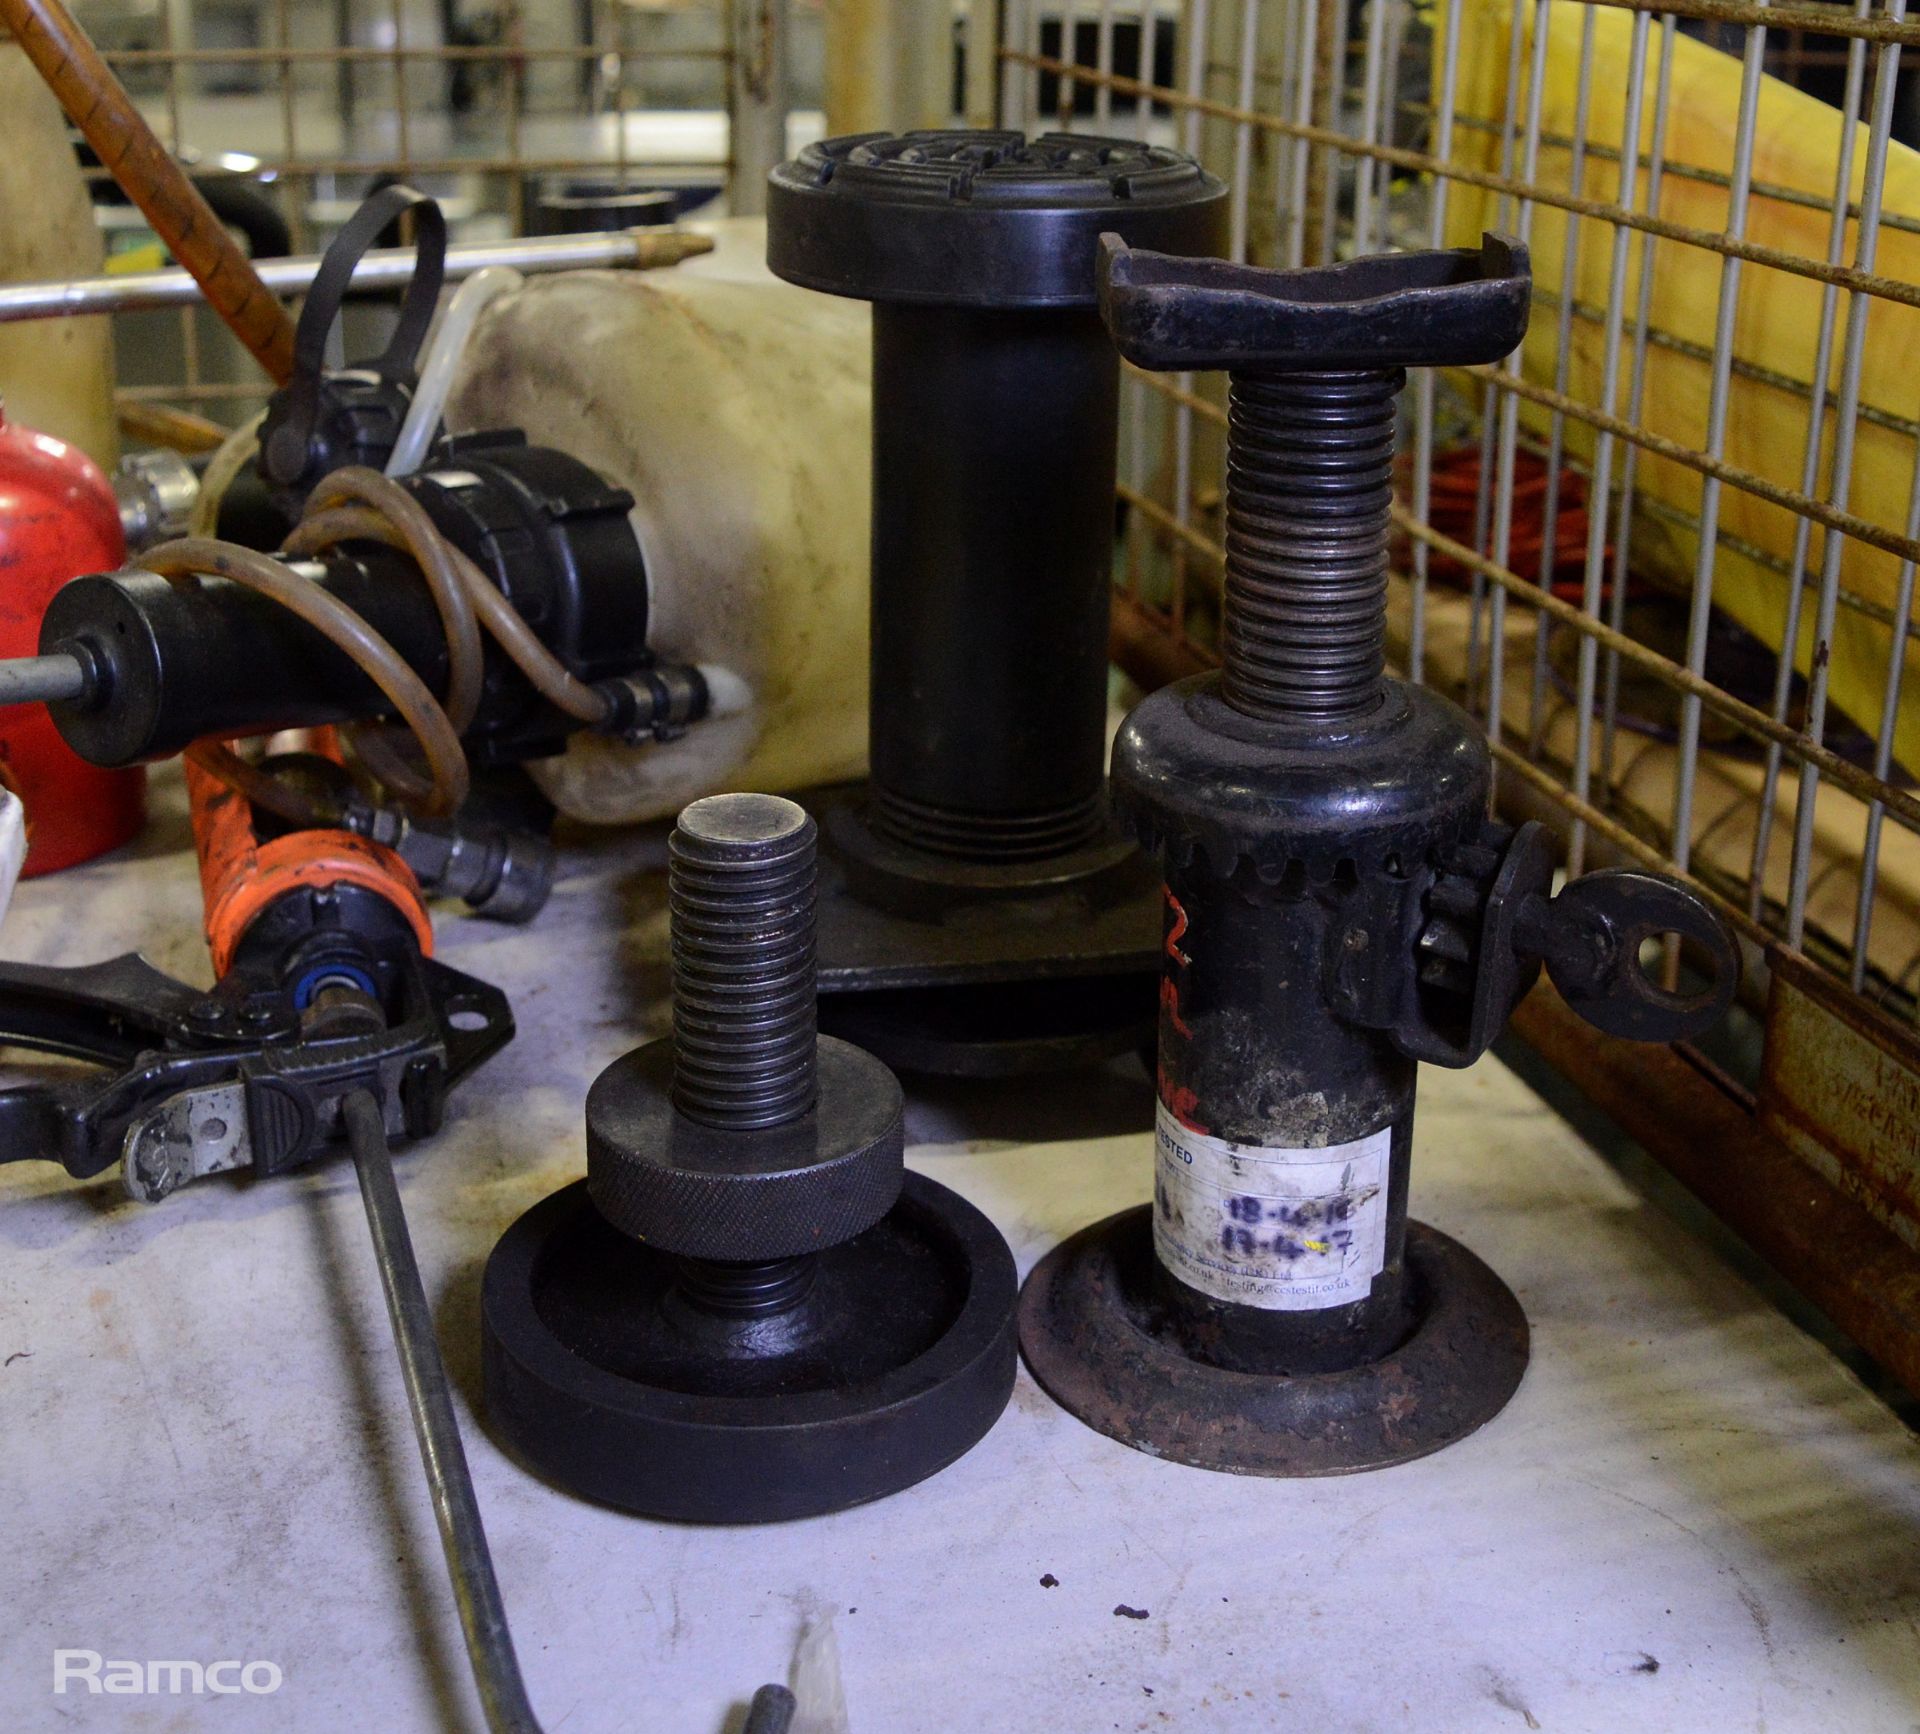 Mechanical / workshop tools - stands, hoses, oil cans - Image 11 of 12